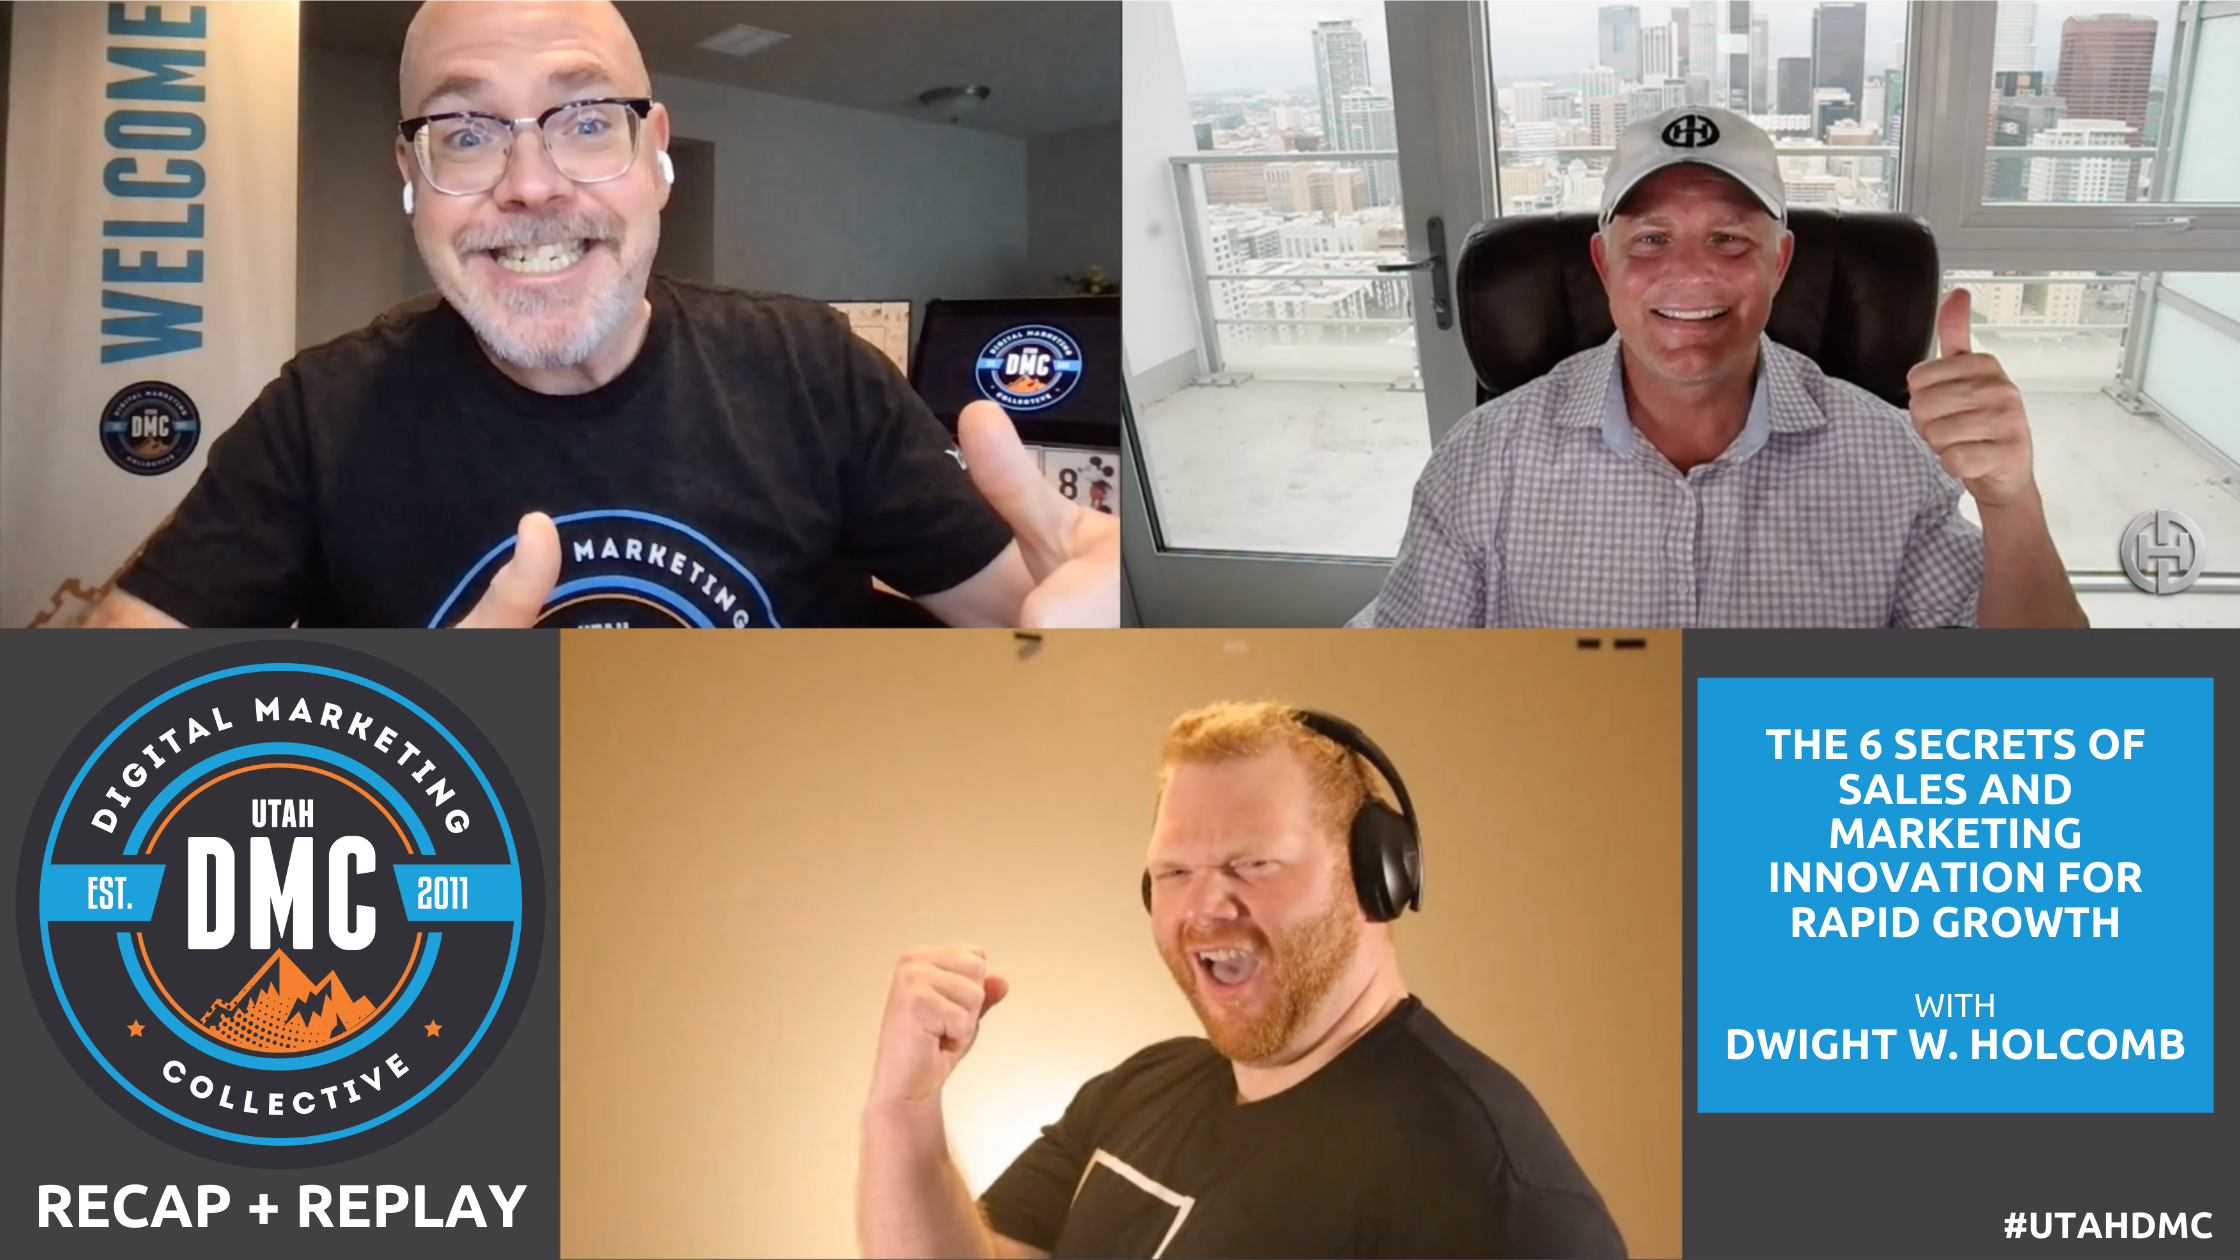 The 6 Secrets of Sales and Marketing Innovation for Rapid Growth with Dwight W. Holcomb - August 18, 2021 [Event Recap + Replay]